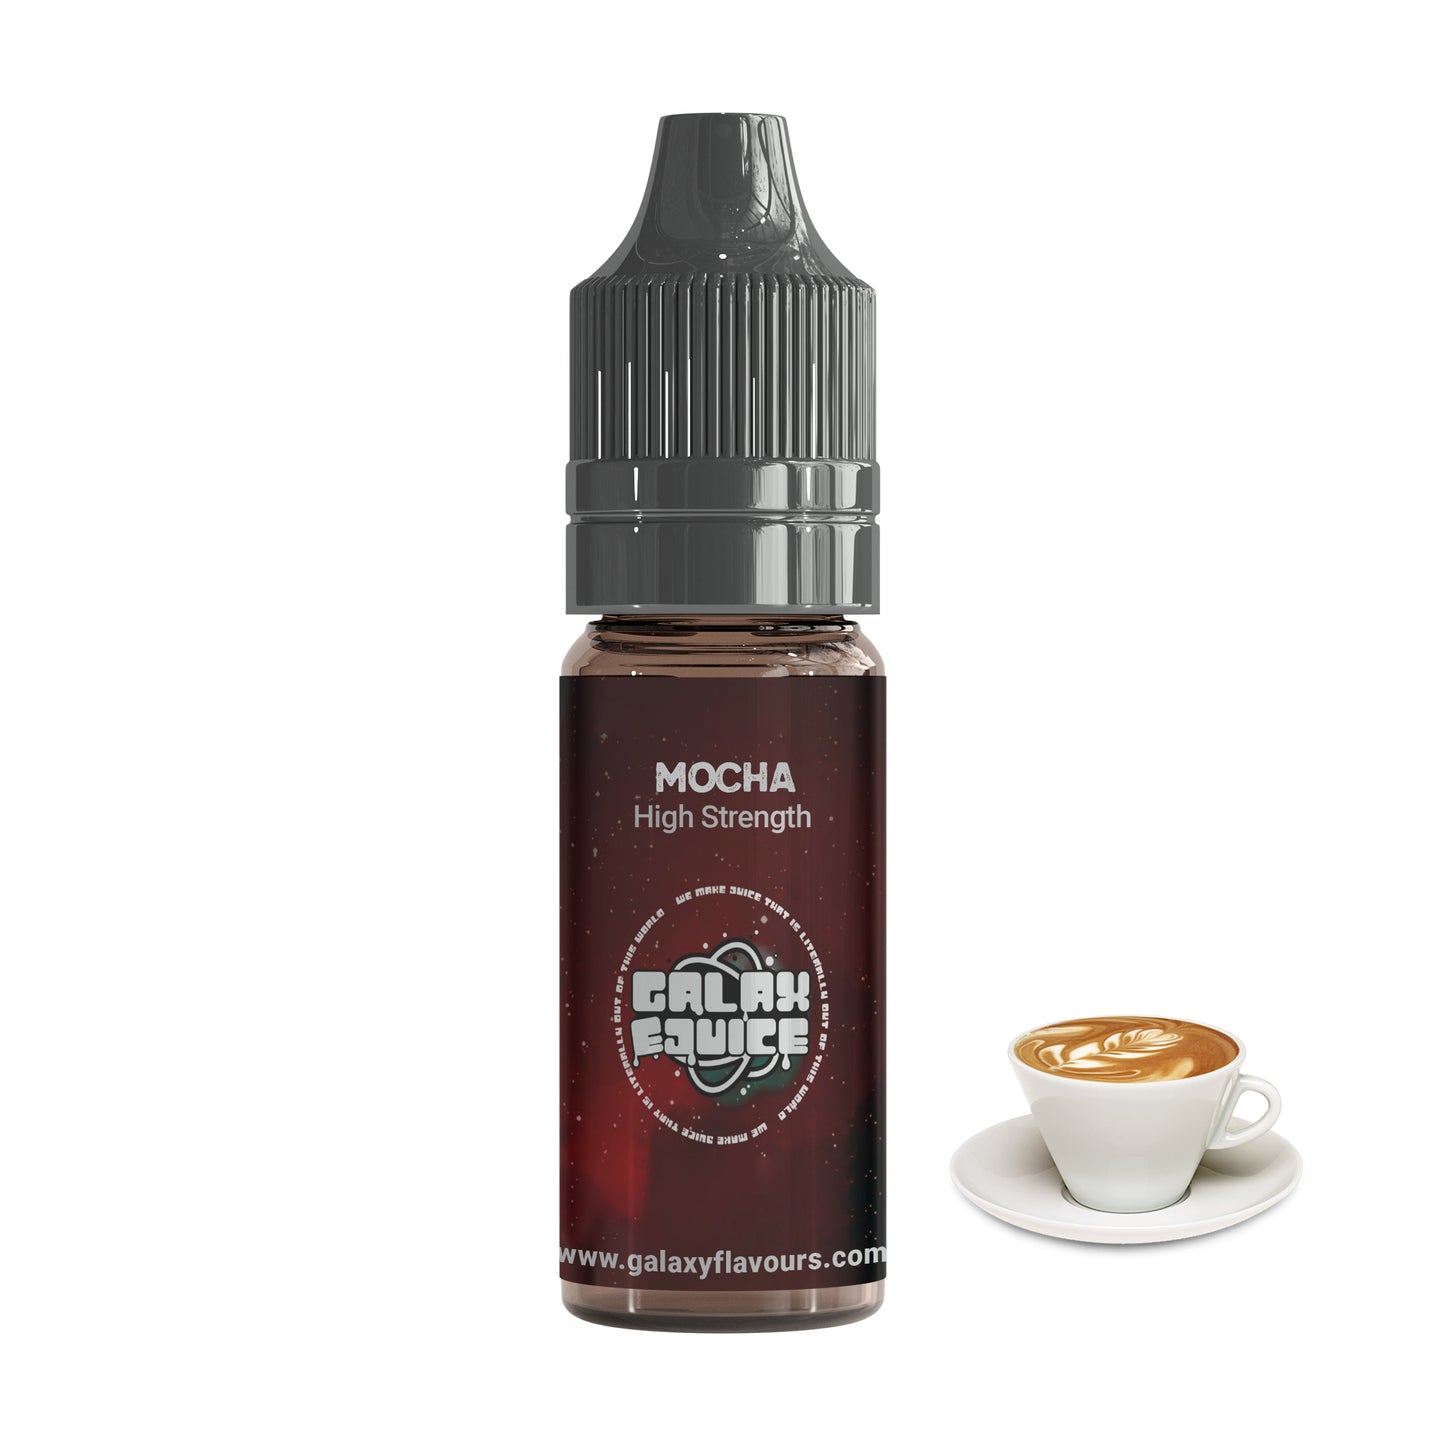 Mocha High Strength Professional Flavouring.